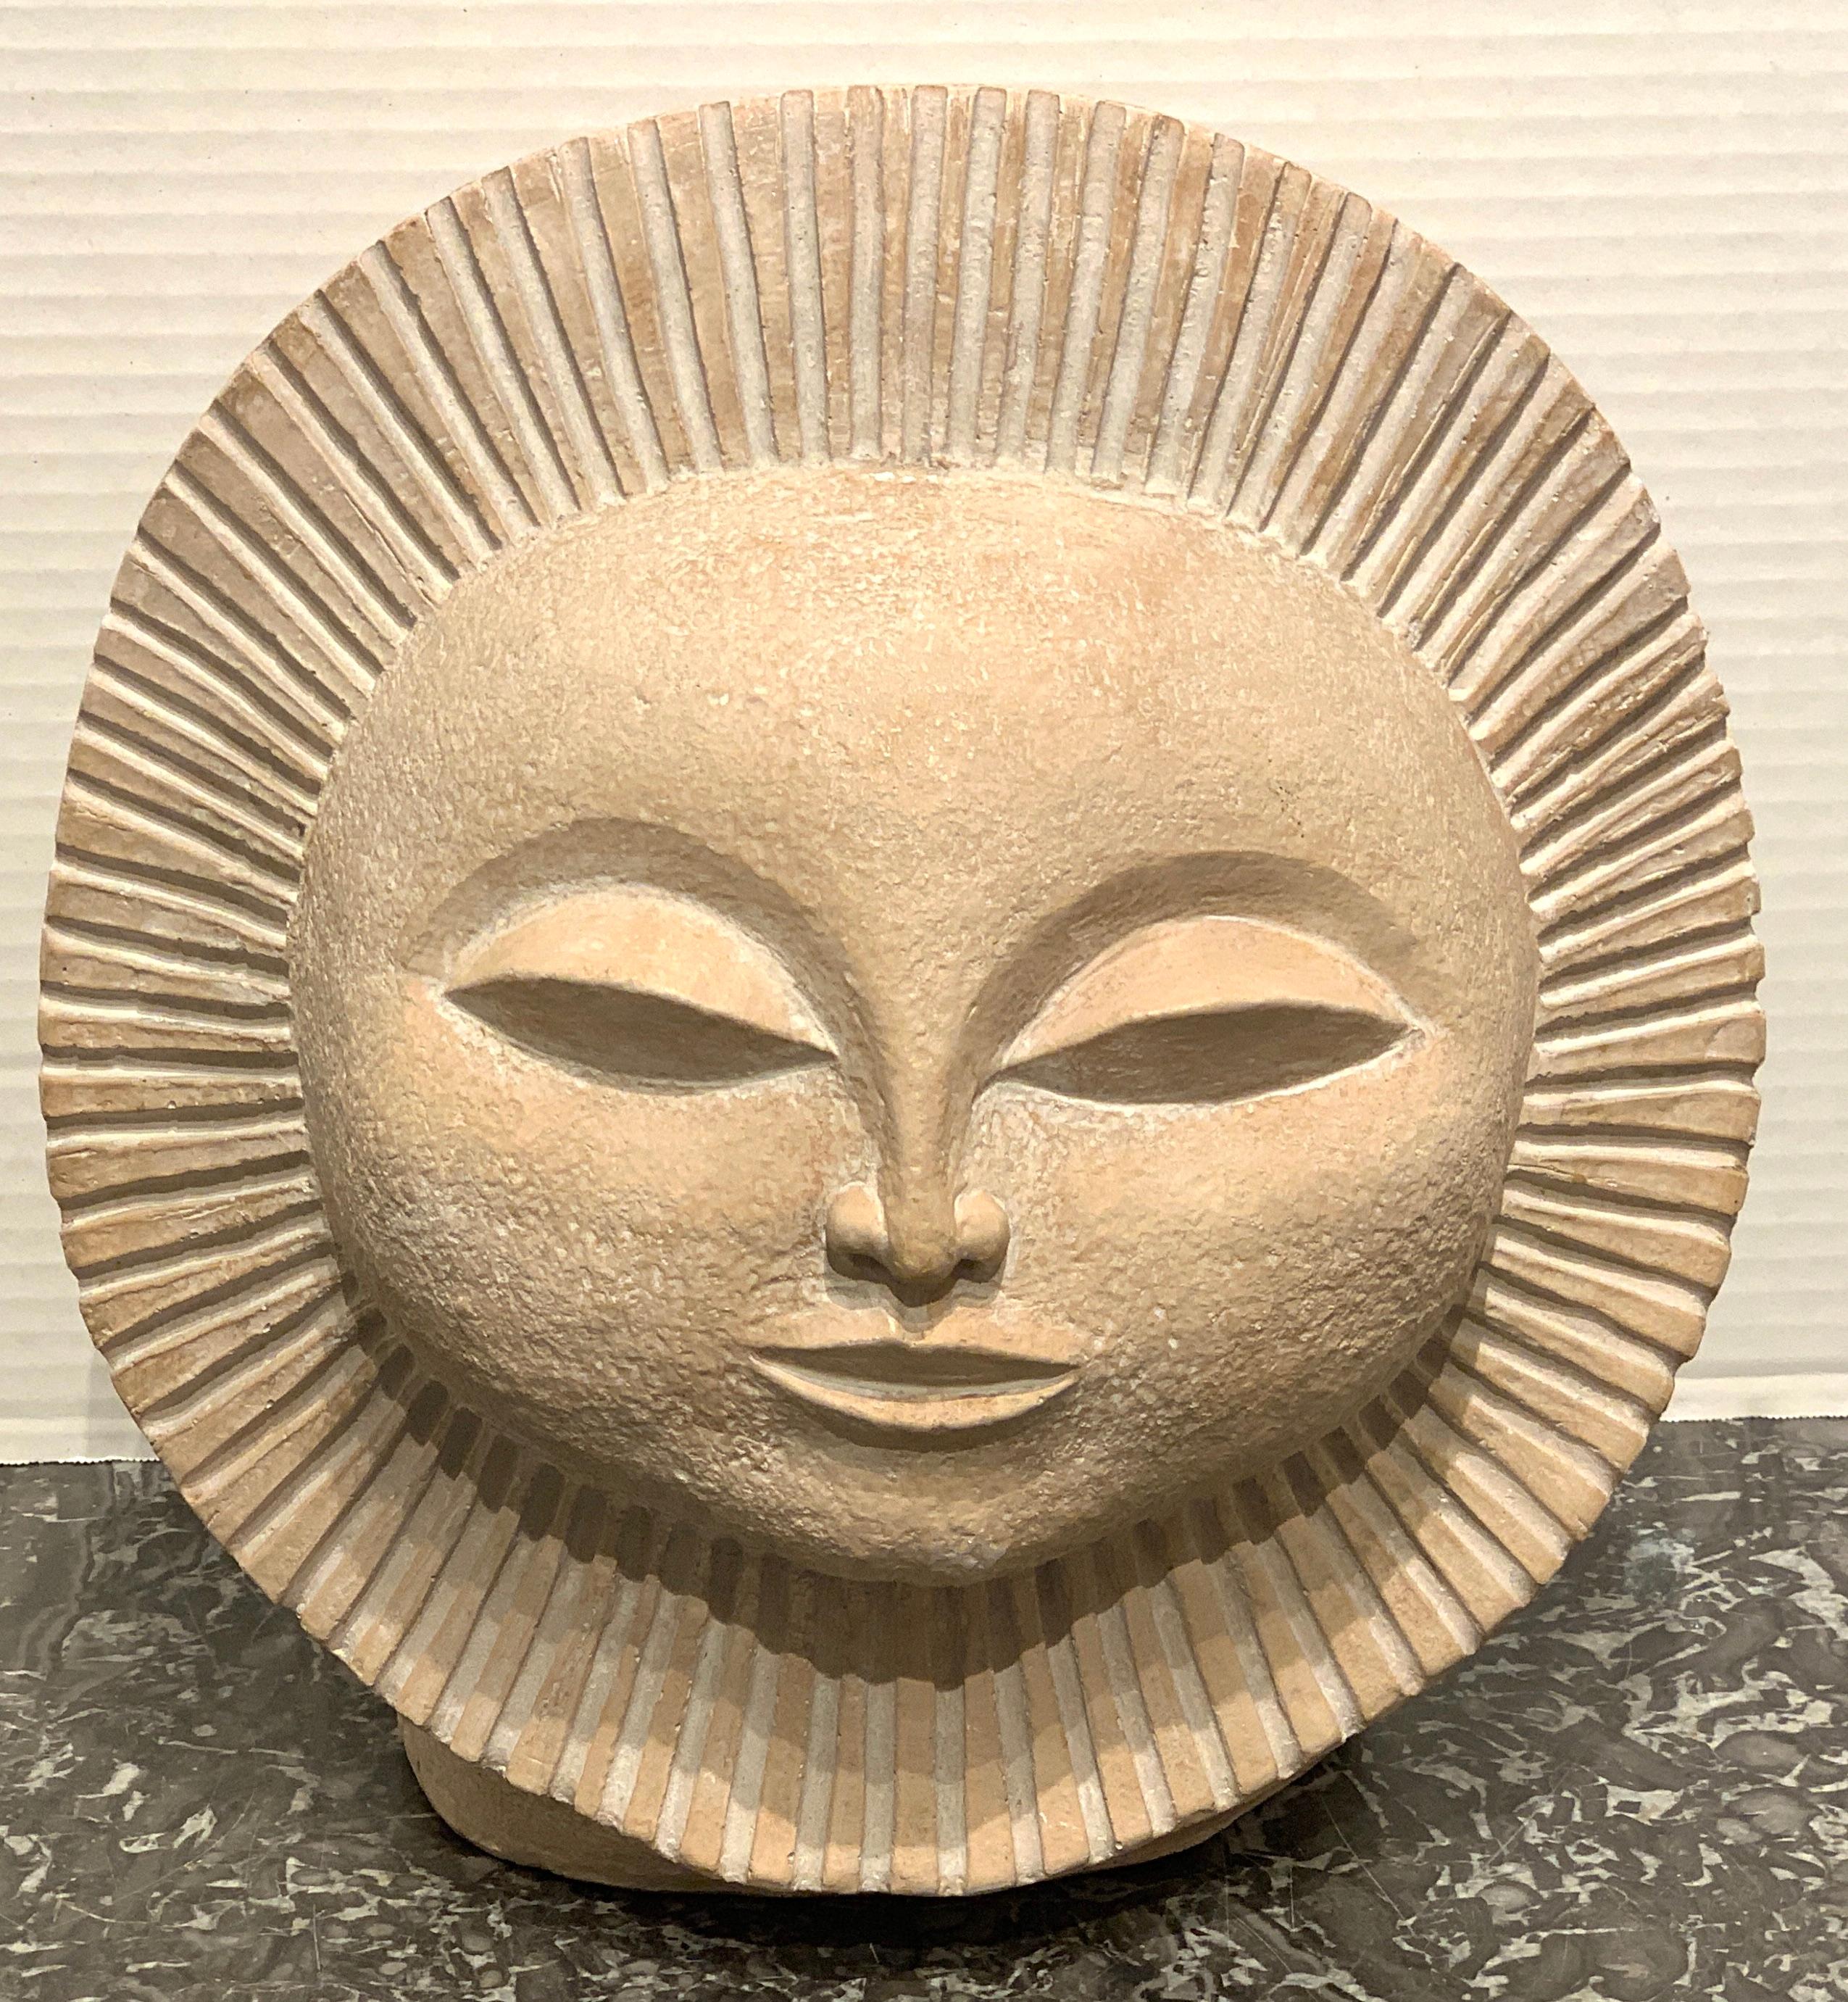 Sunburst sculpture by Paul Bellardo, (1924-2017)
Stamped with copyright Austin productions, 1968
Cast stone textured pottery.